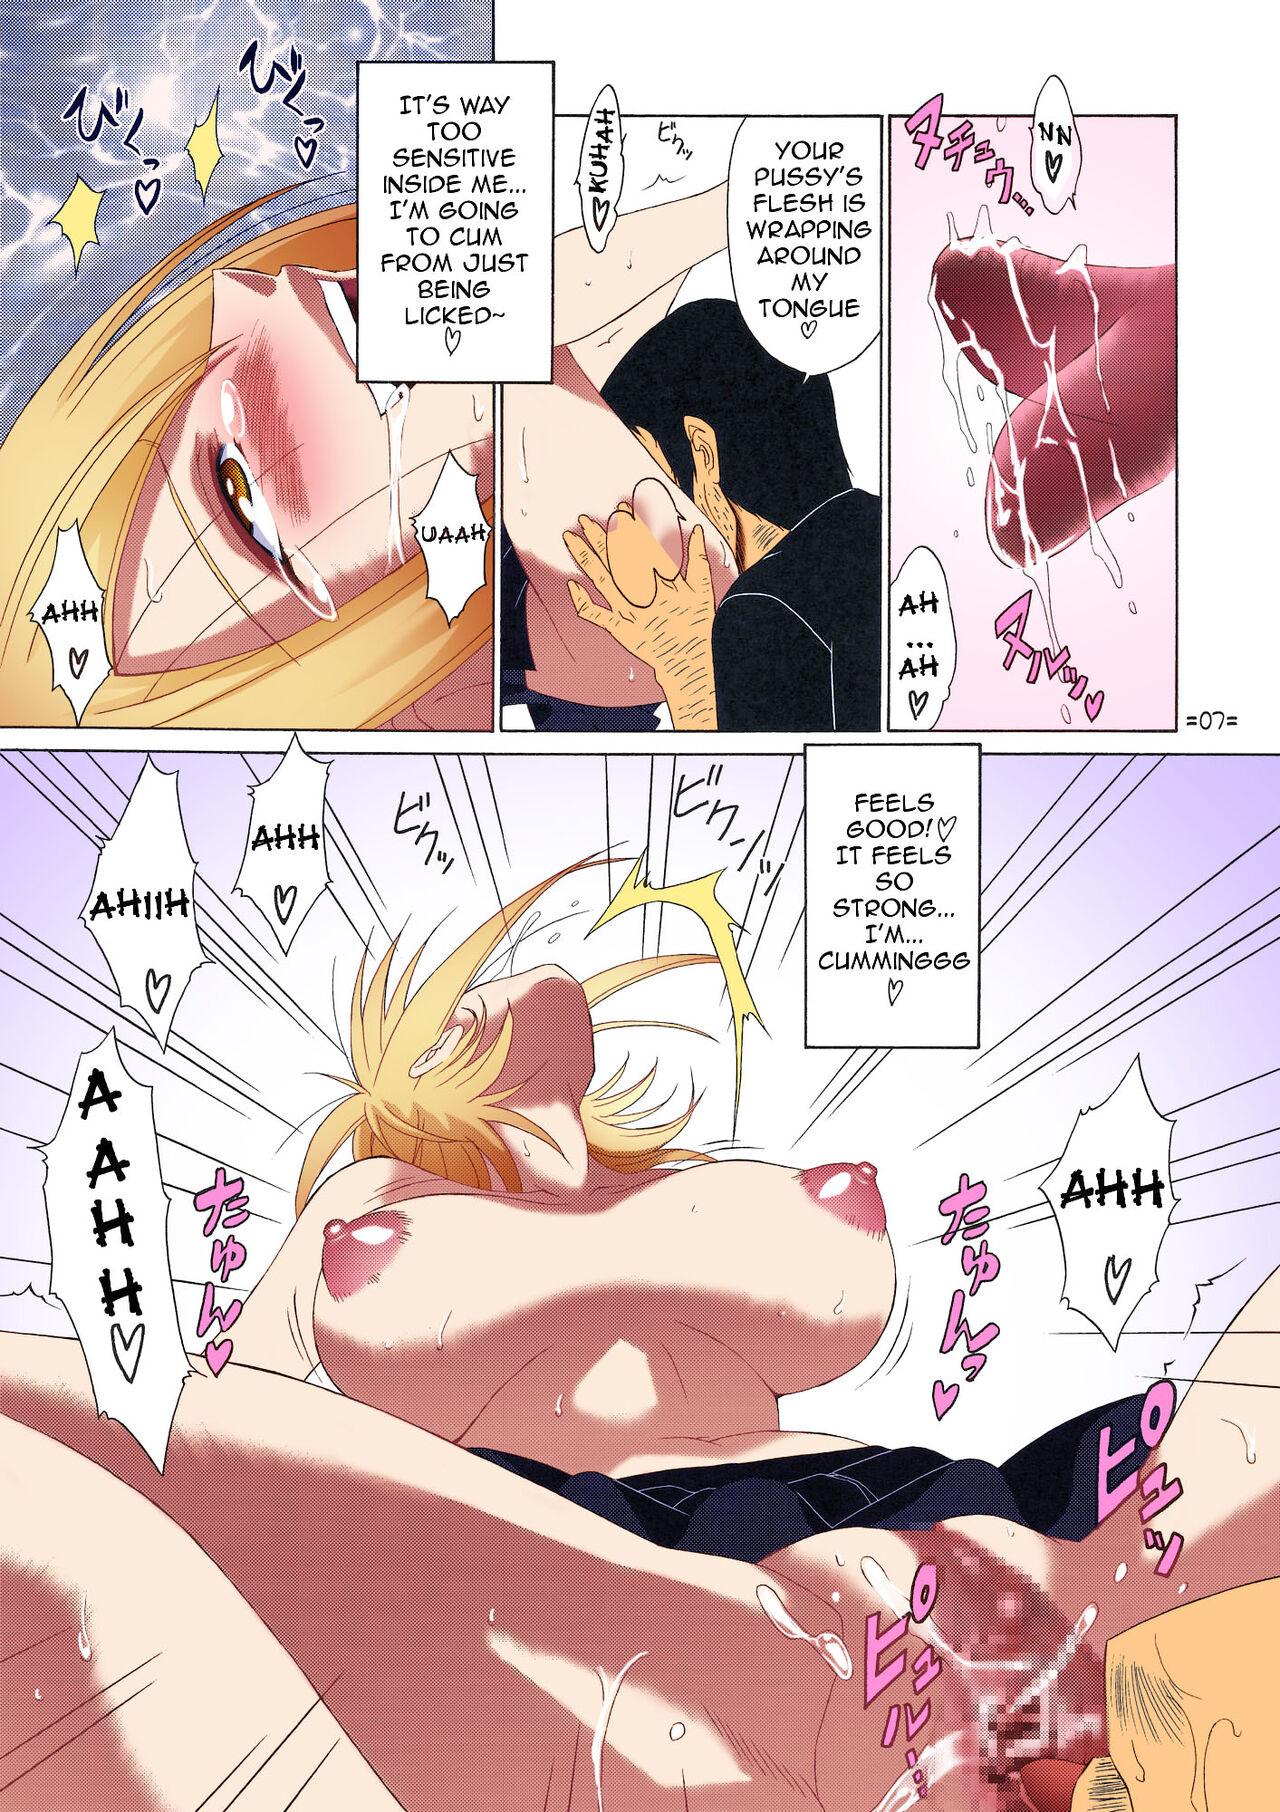 Pussyeating FAIRY SLAVE II - Fairy tail Dicks - Page 8